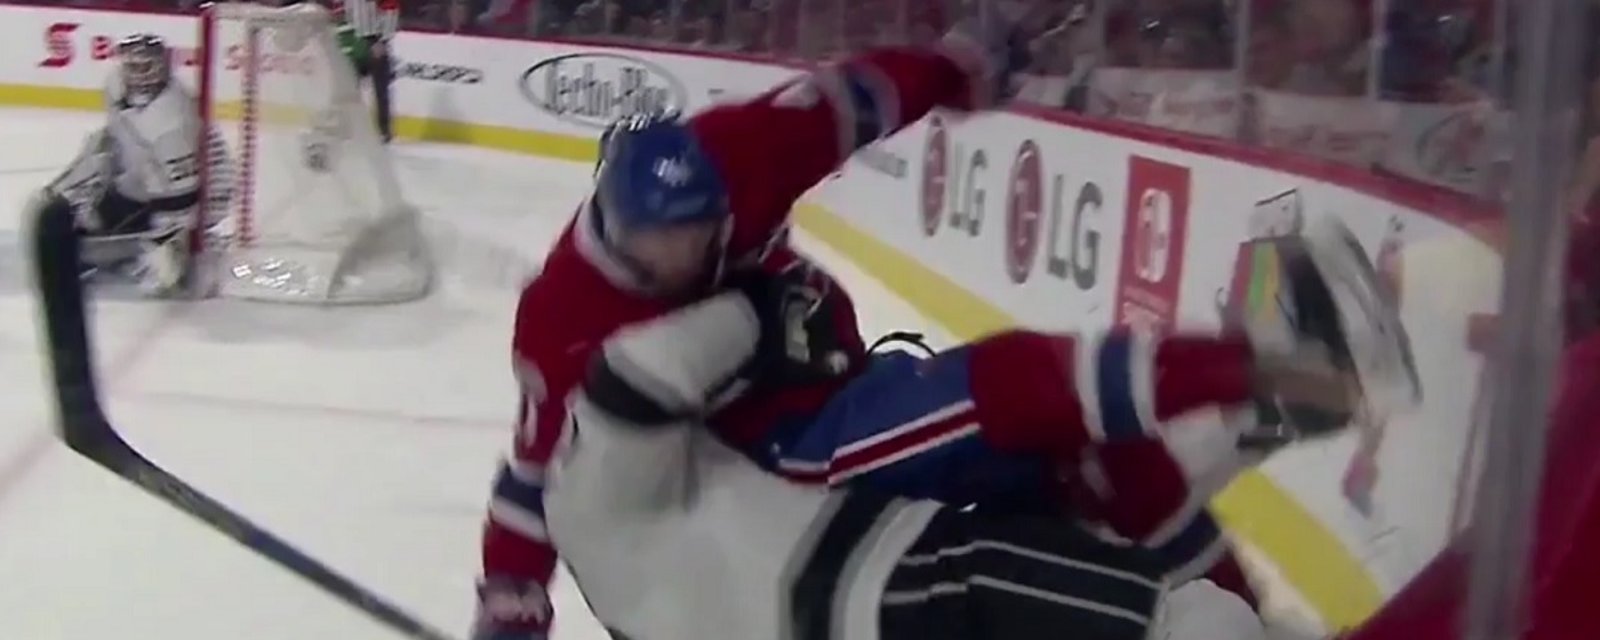 Drew Doughty delivers a suplex to Paul Byron.